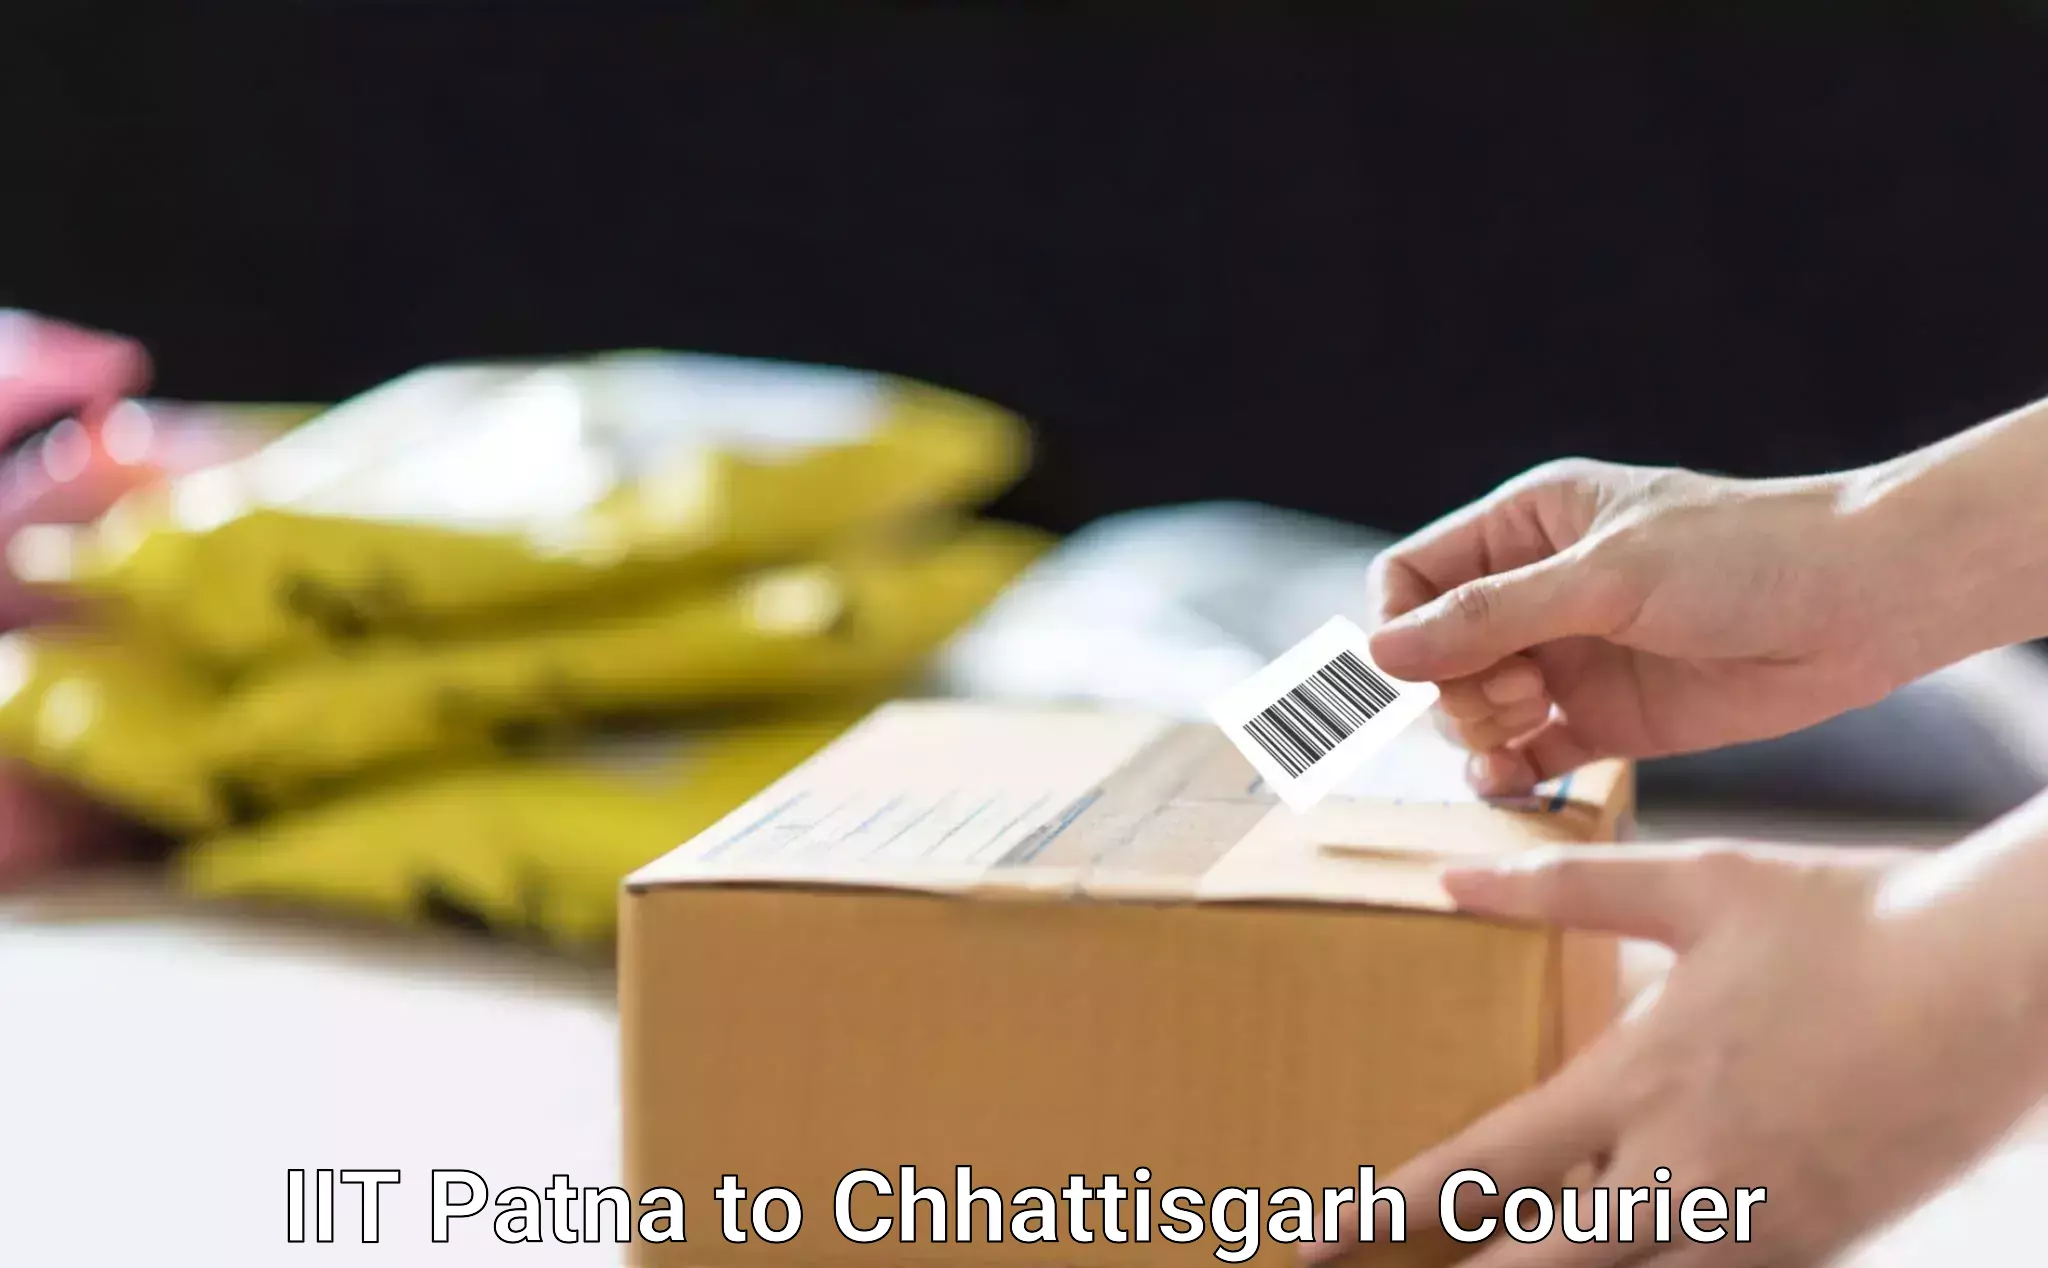 Expert packing and moving IIT Patna to Raipur